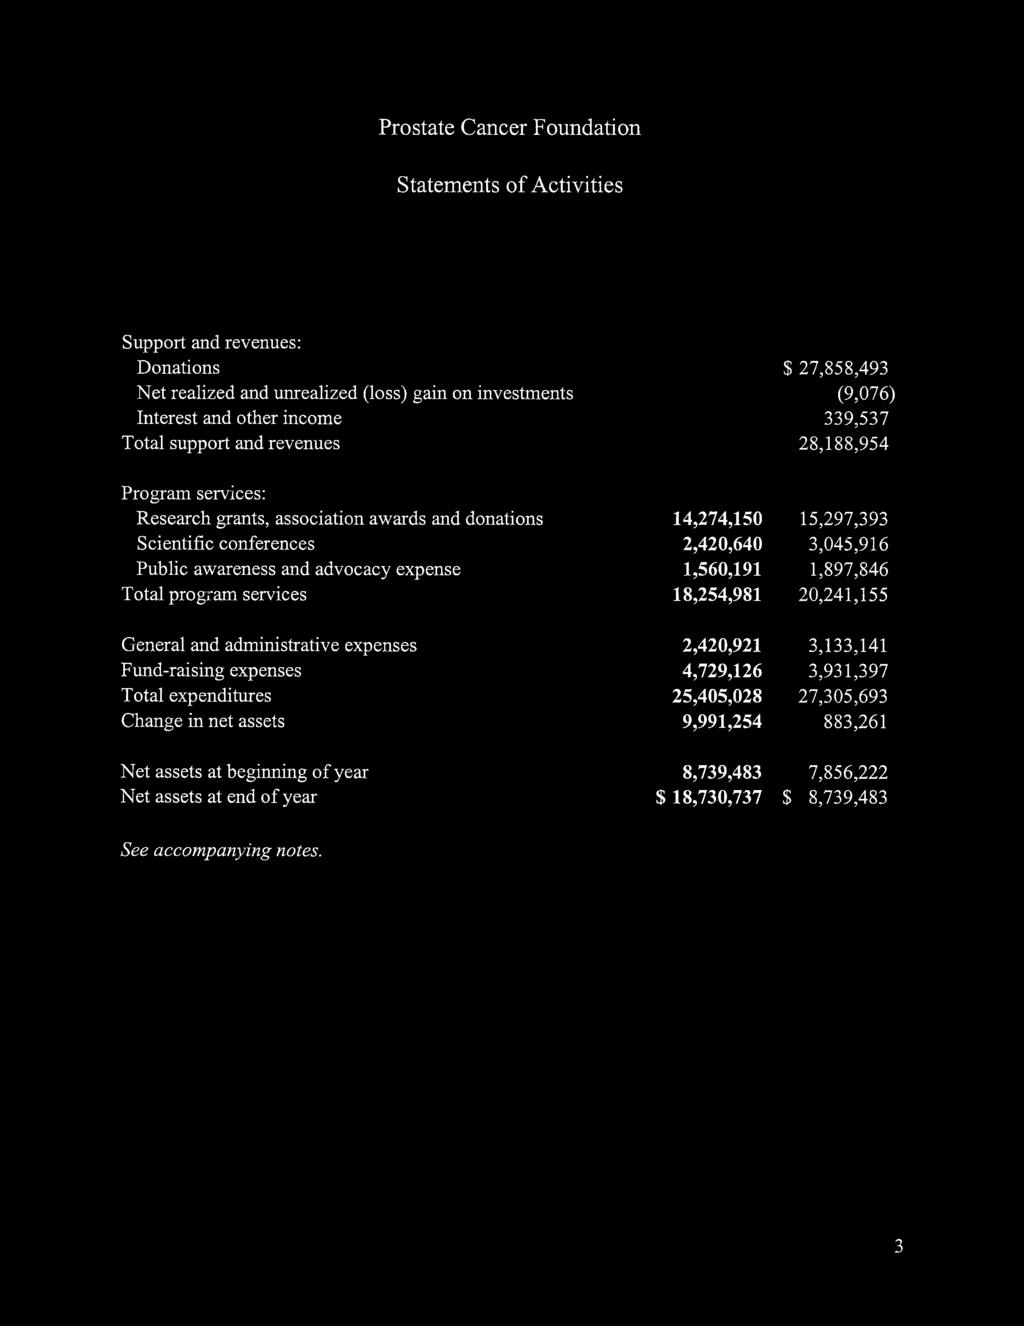 Statements of Activities Years Ended December 31 2007 2006 Support and revenues: Donations $ 34,773,813 $ 27,858,493 Net realized and unrealized (loss) gain on investments (1,578) (9,076) Interest